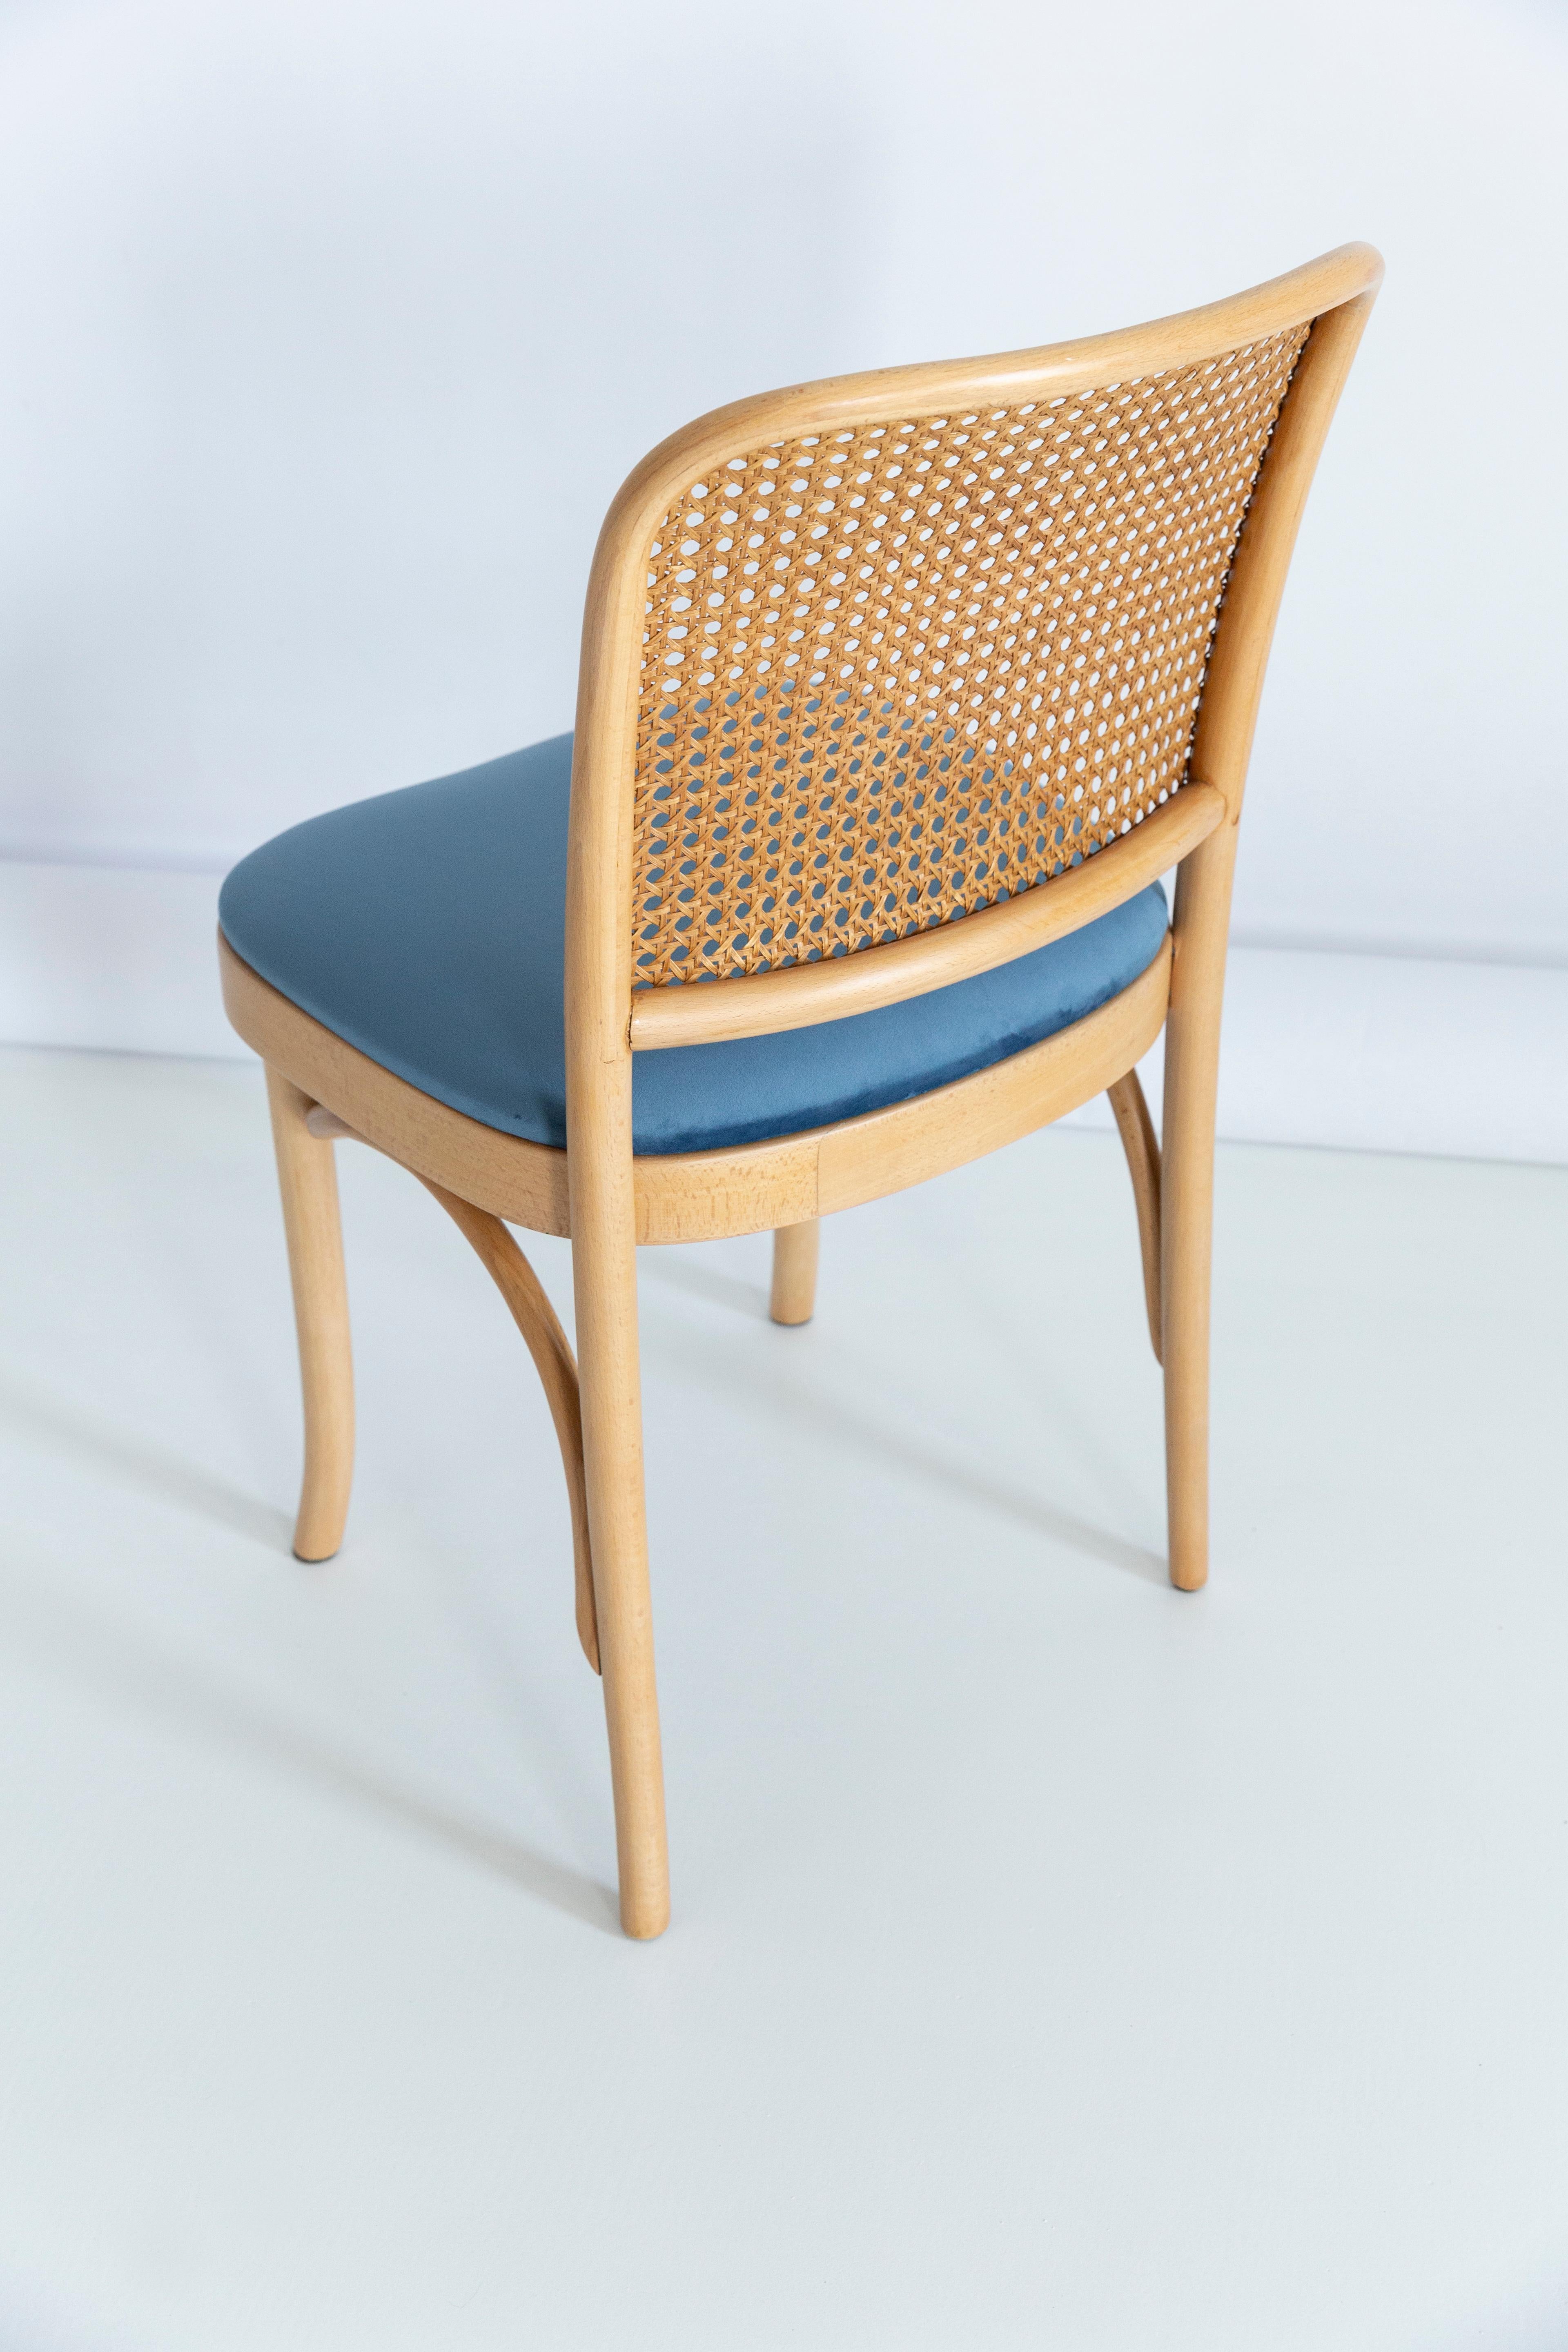 Set of Four Blue Velvet Thonet Wood Rattan Chairs, 1960s For Sale 5